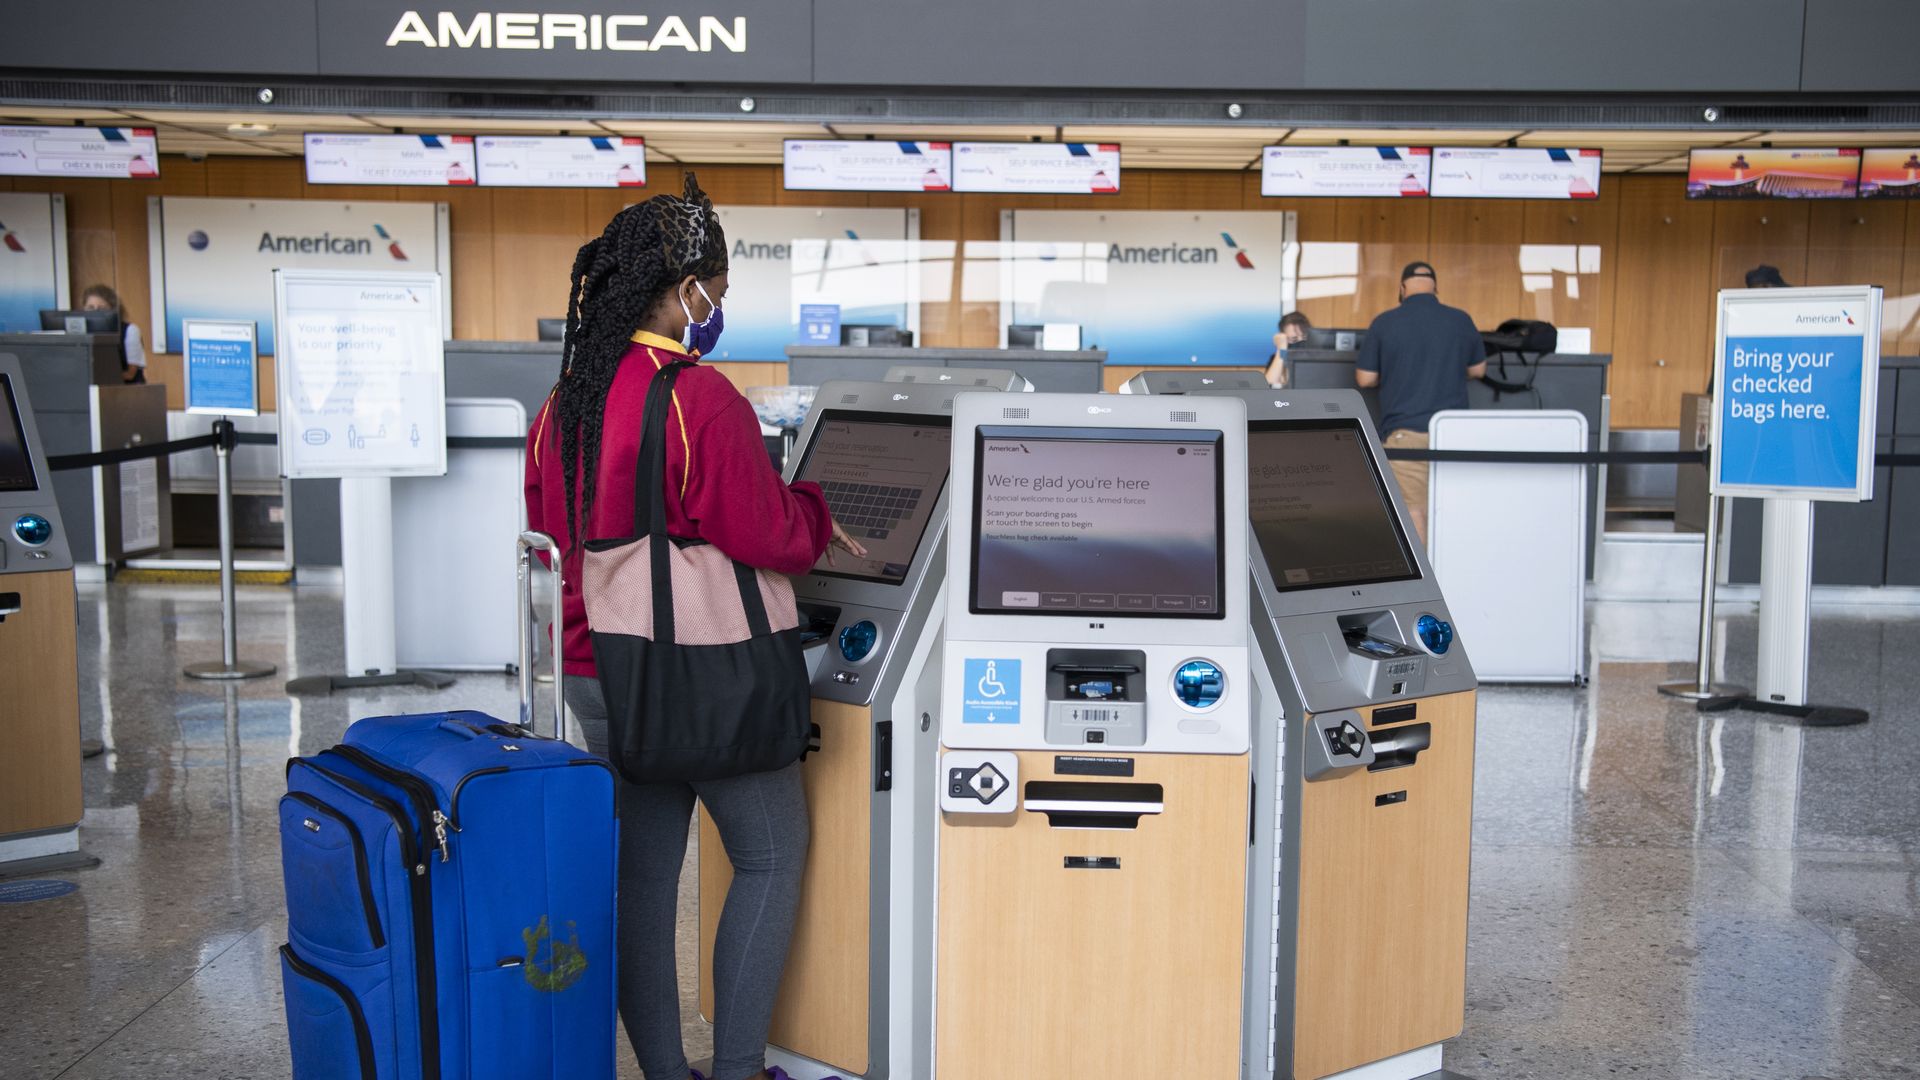 A traveler uses an American Airlines kiosk in Dulles International Airport 